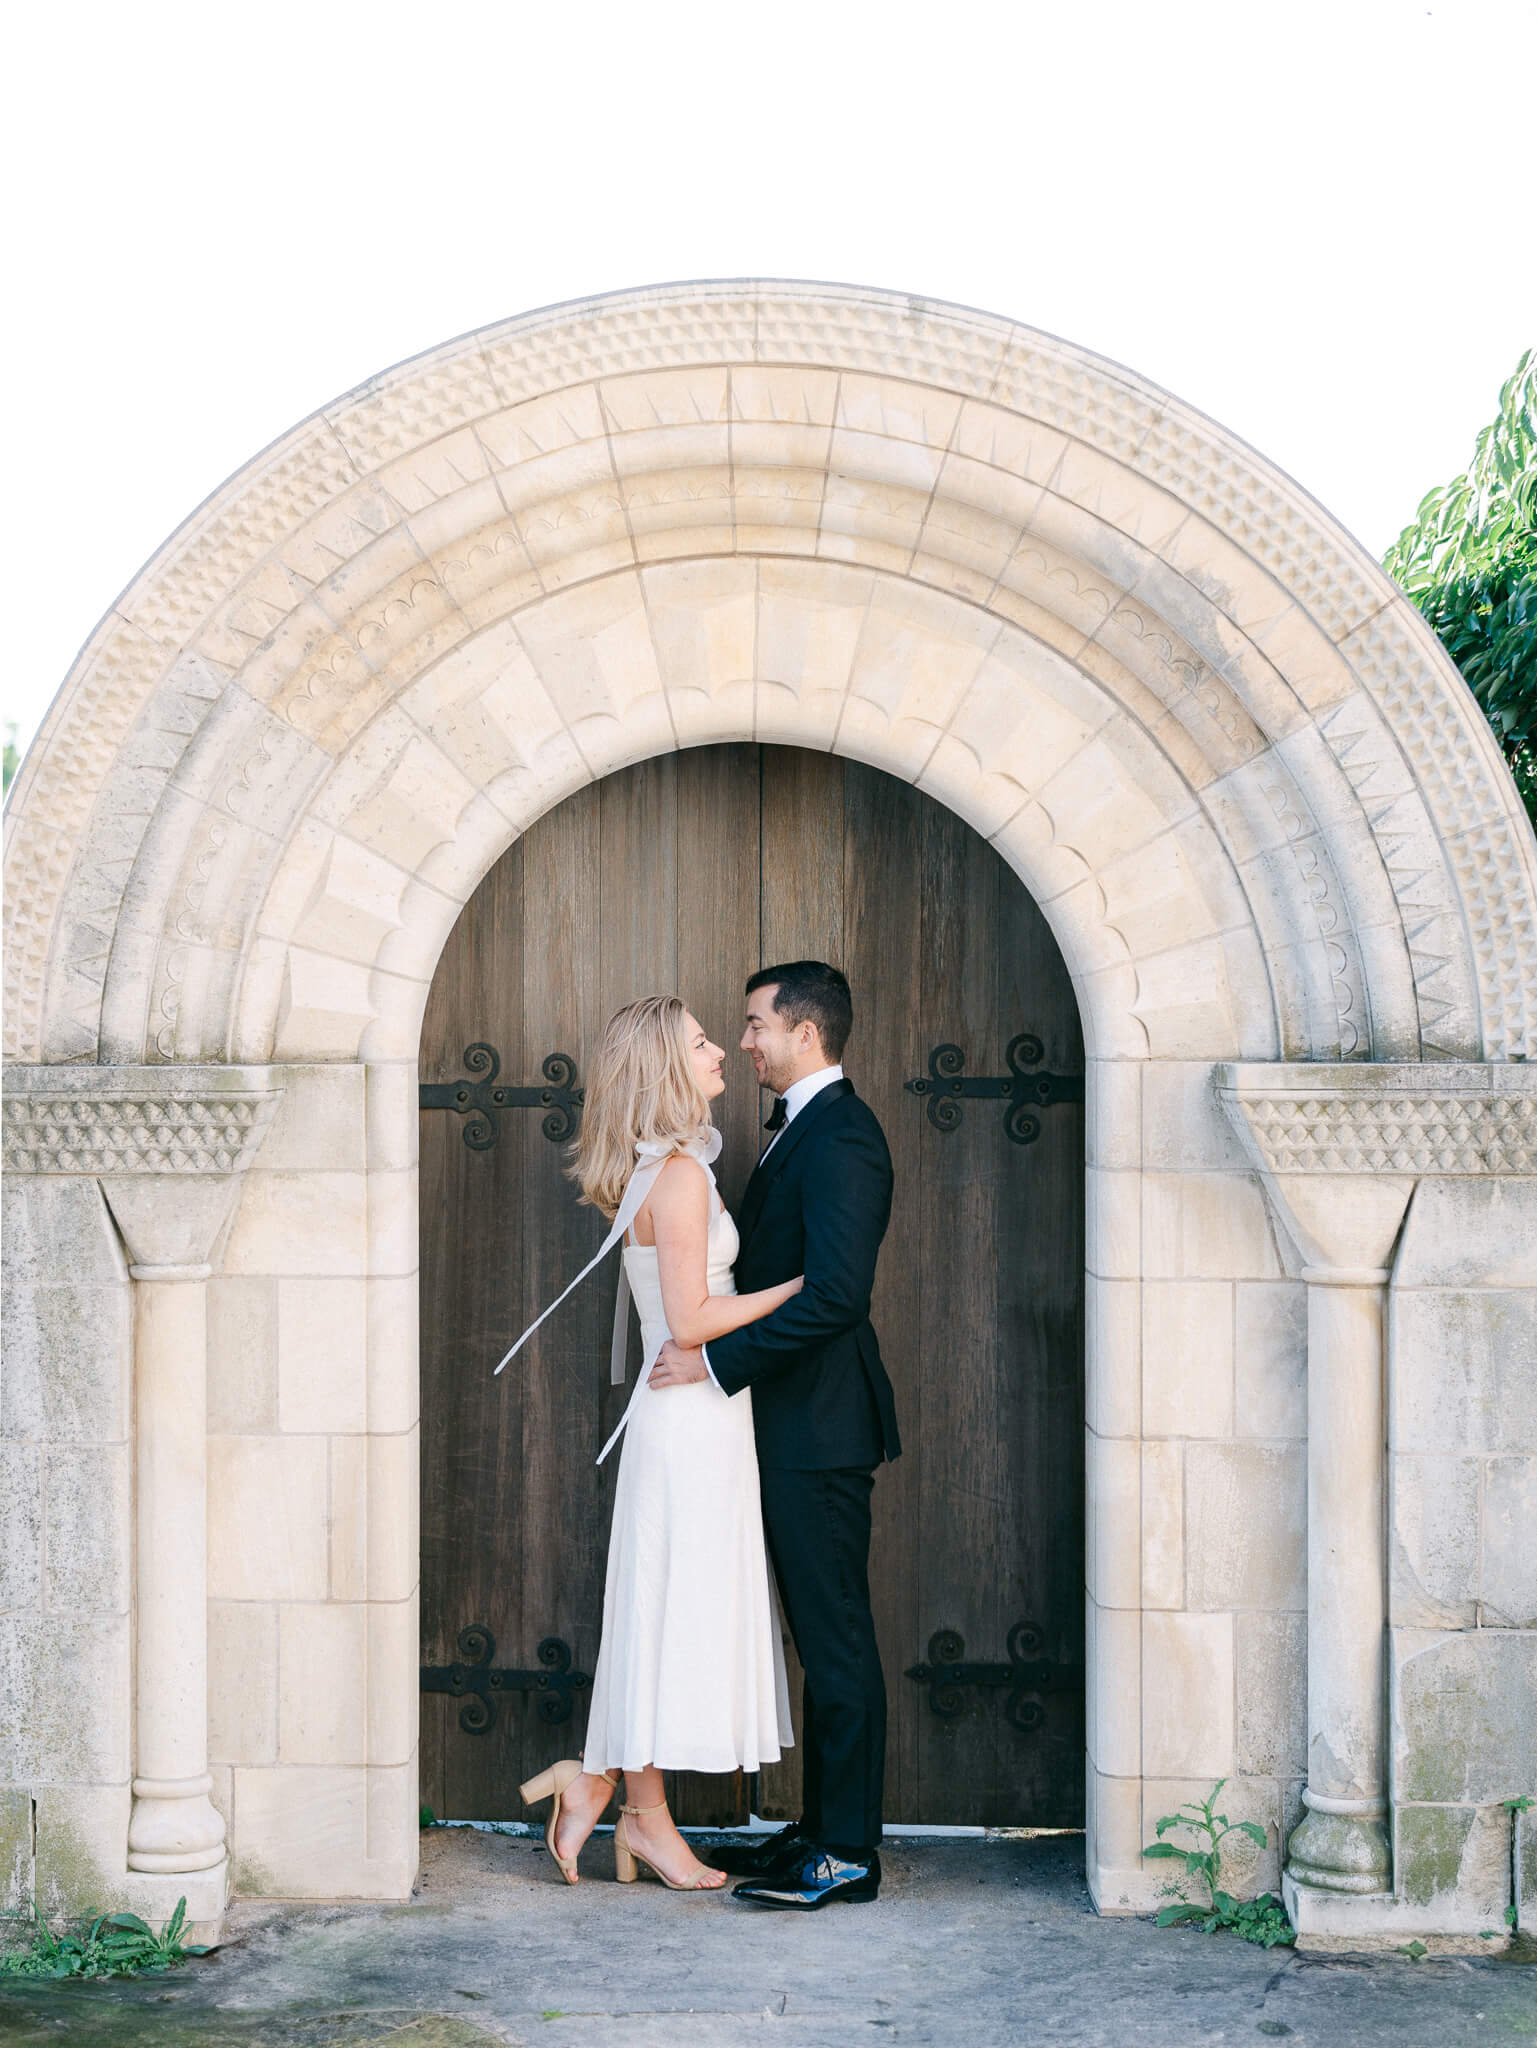 An engaged couple embracing in front of an arched door at Bishop's Garden.